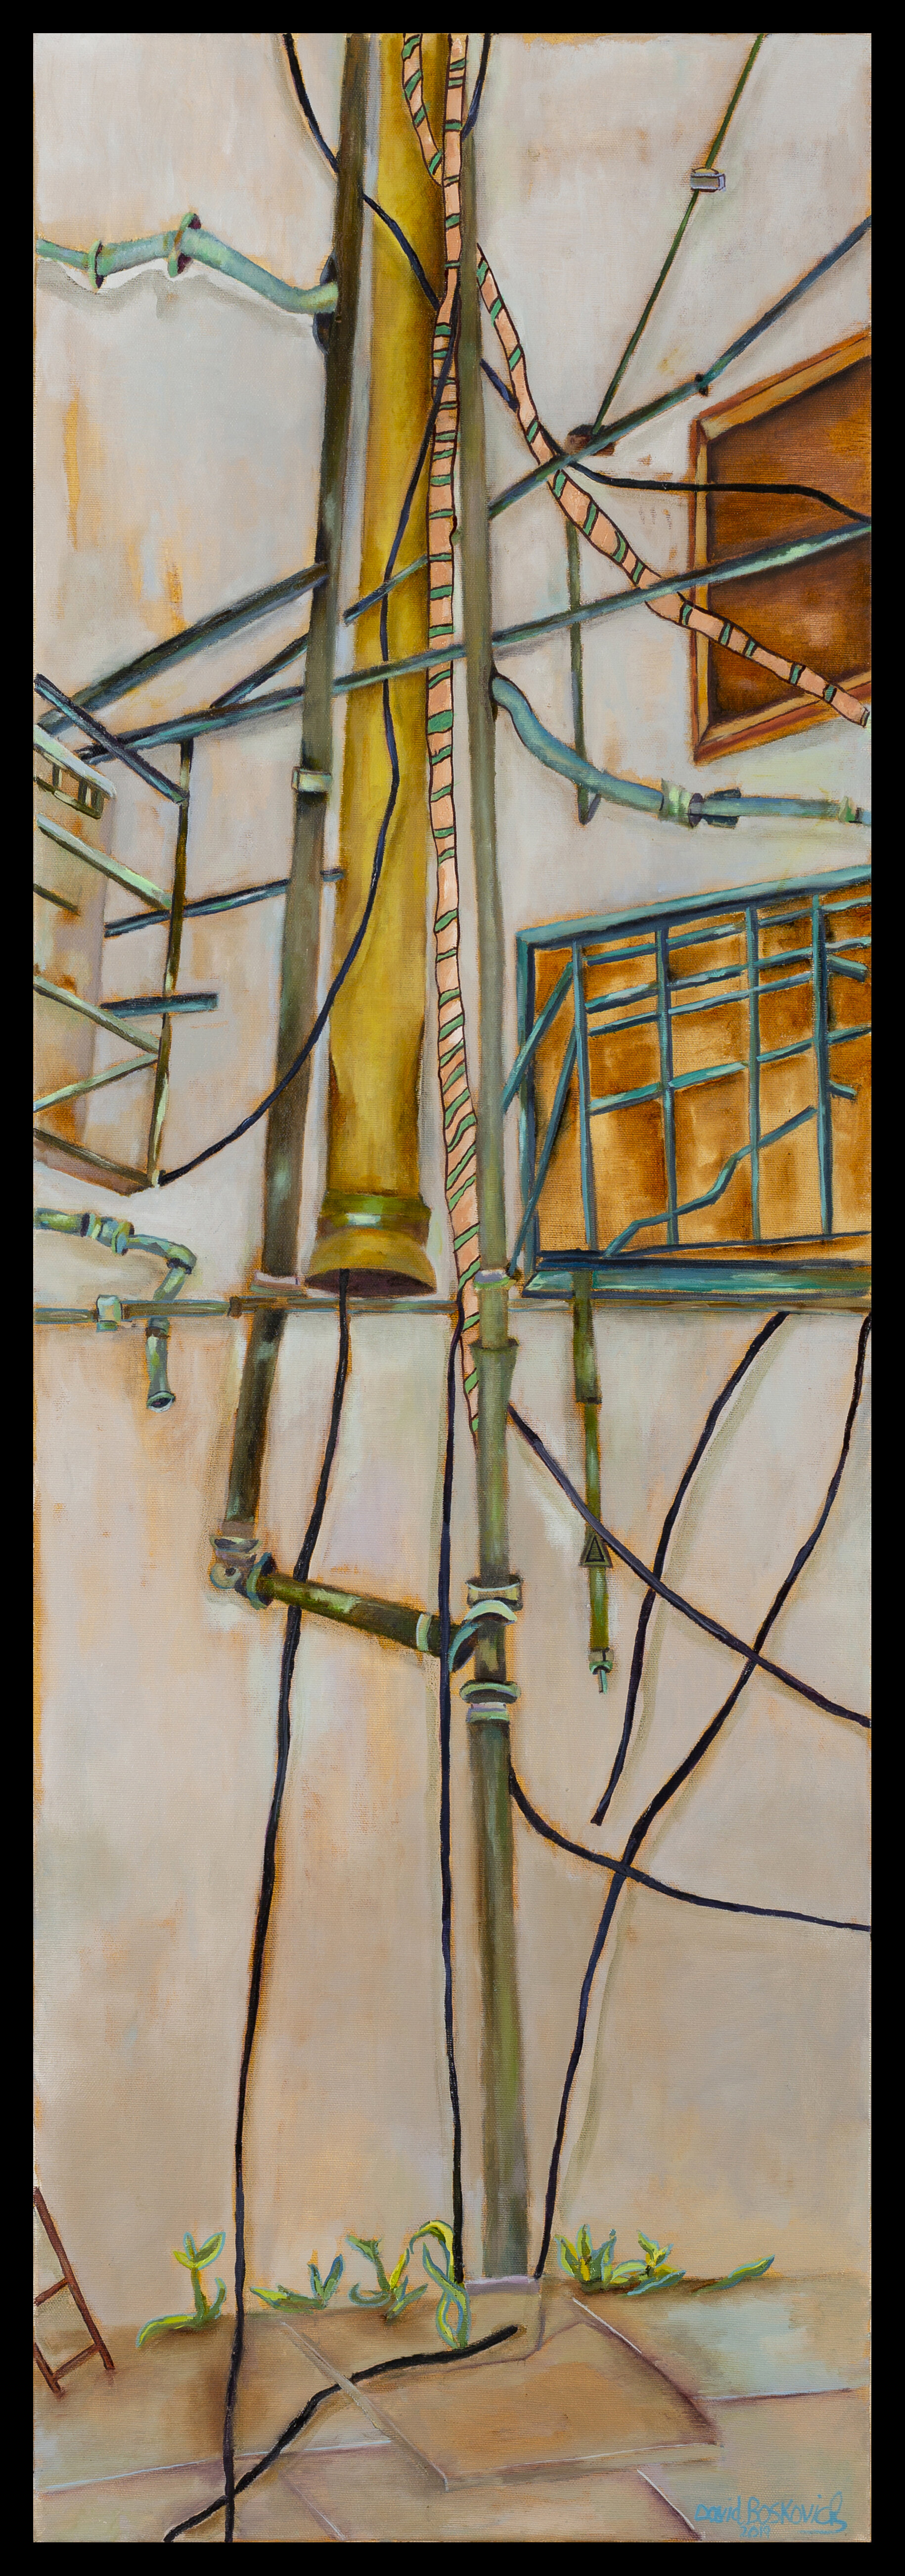 Sewer pipe hanging, oil on canvas, 120x40 cm, 2019.jpg